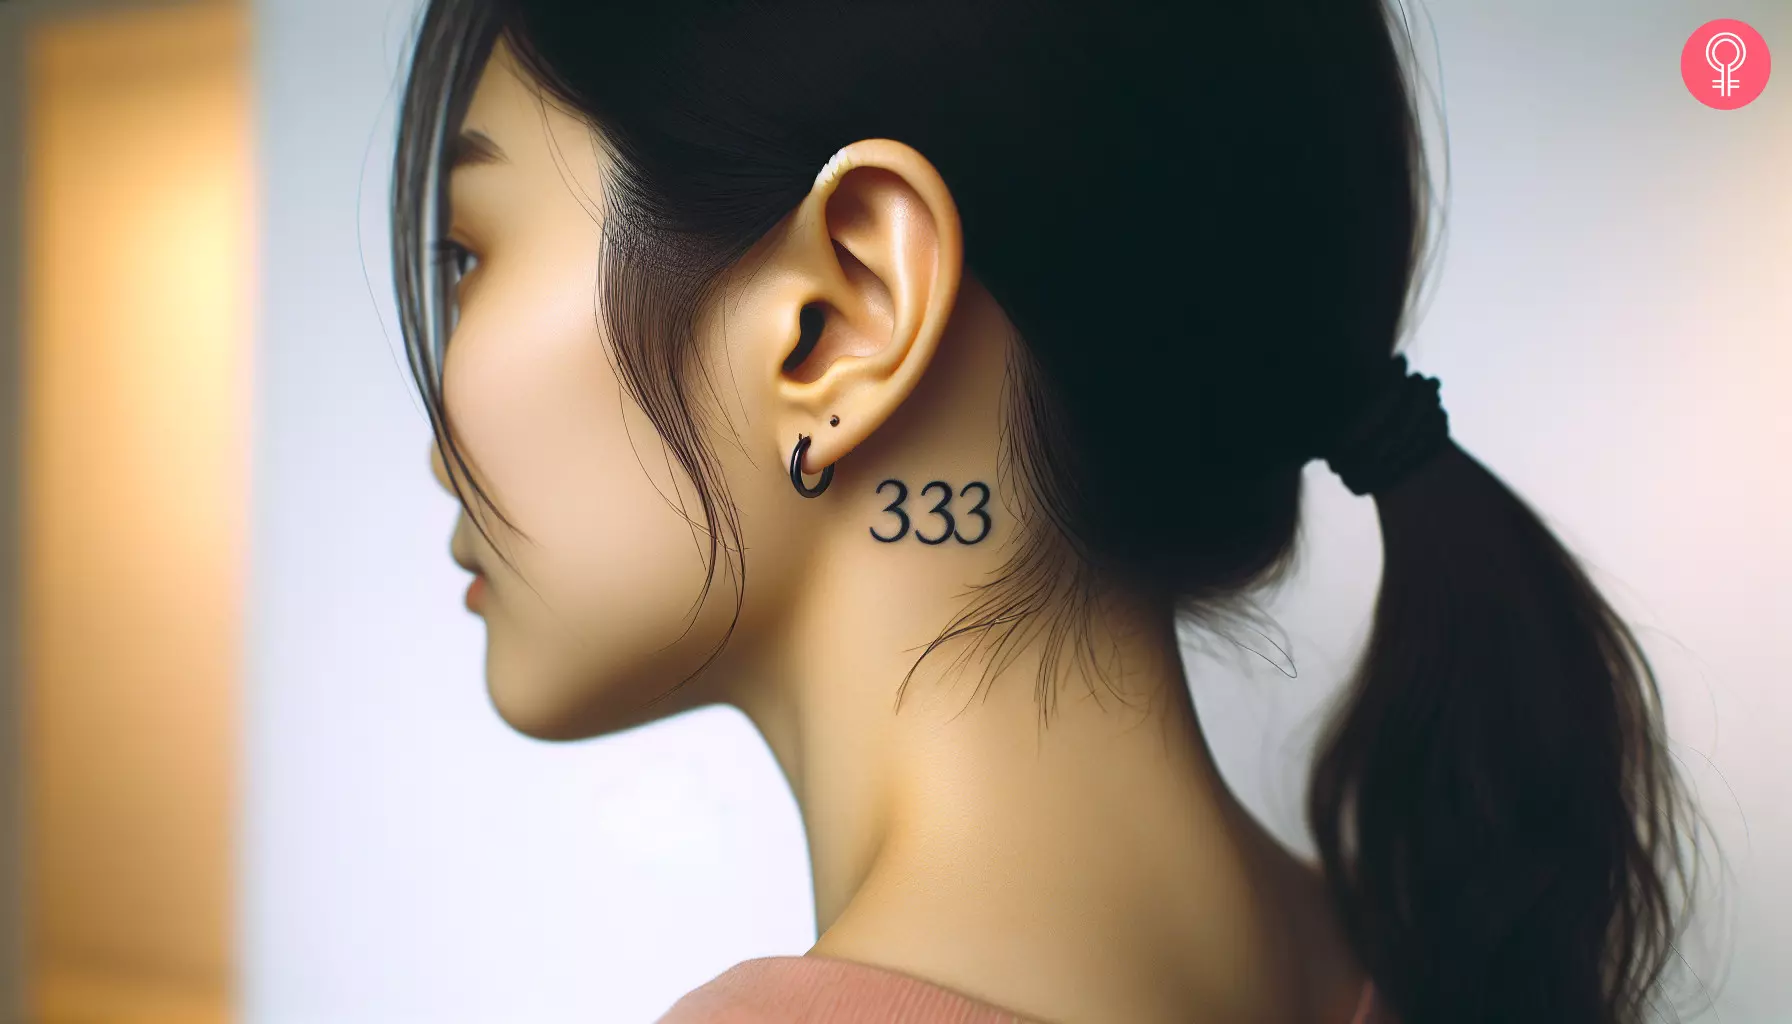 Woman with a 333 tattoo behind her ear